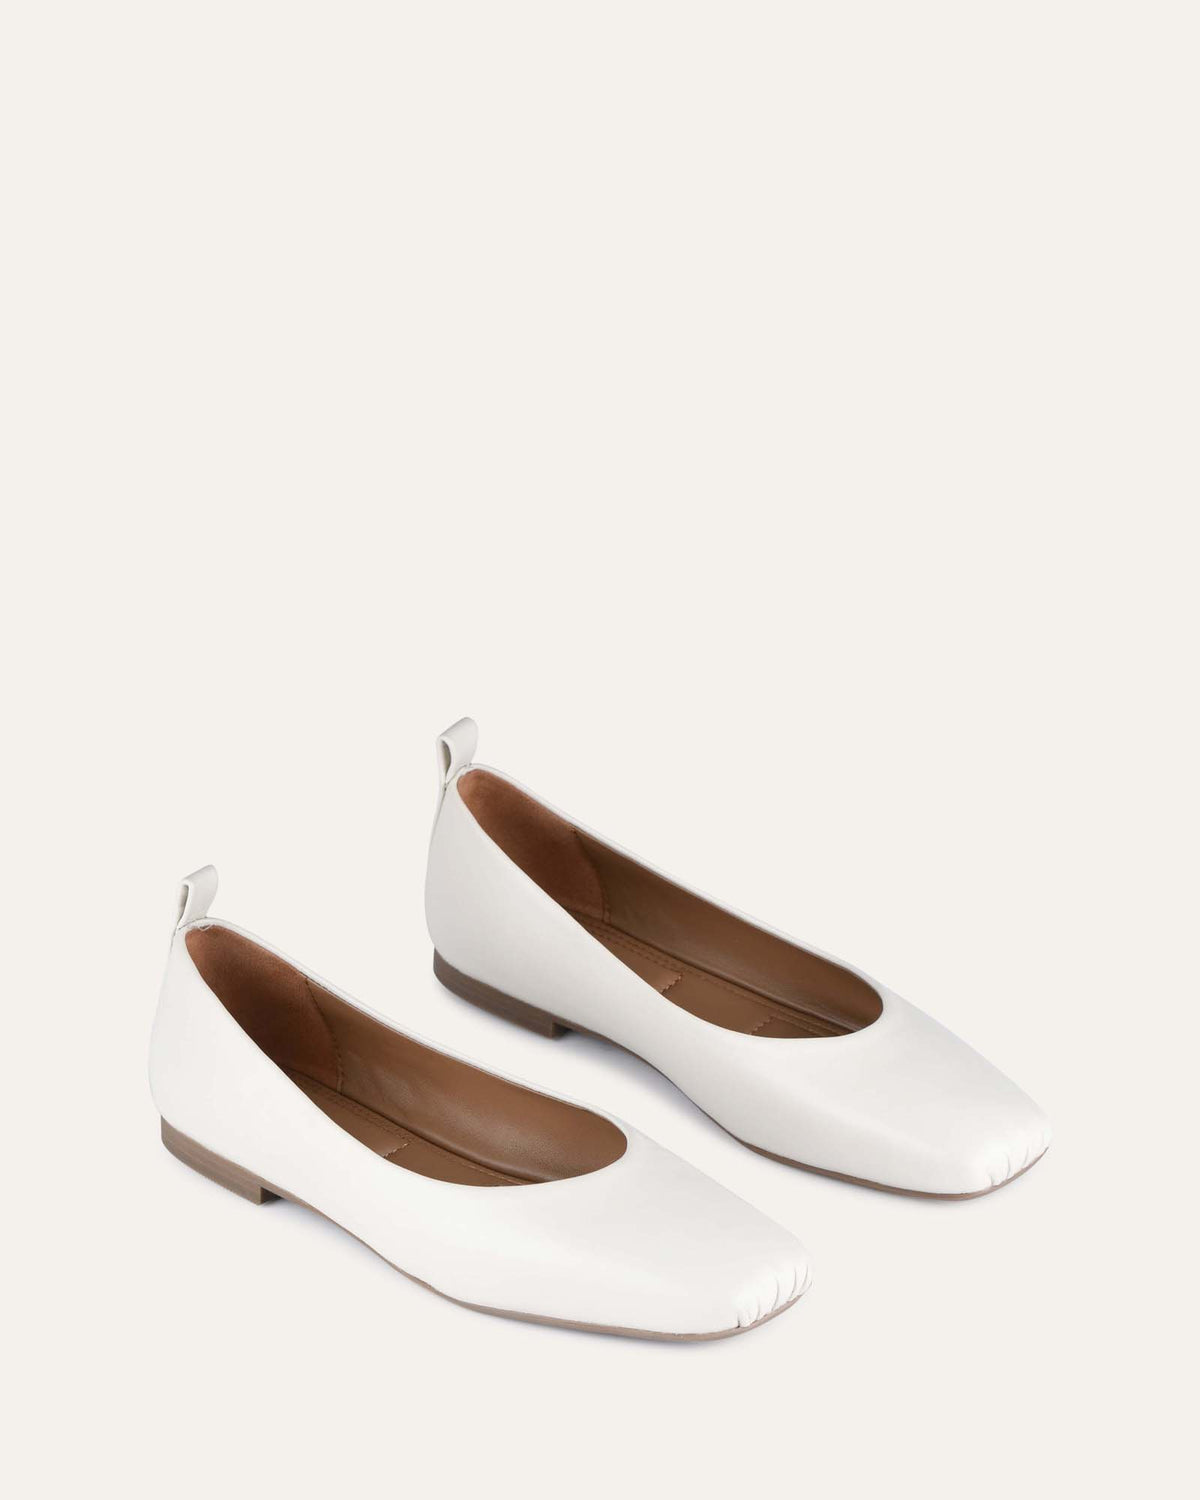 SIERRA CASUAL FLATS OFF WHITE LEATHER